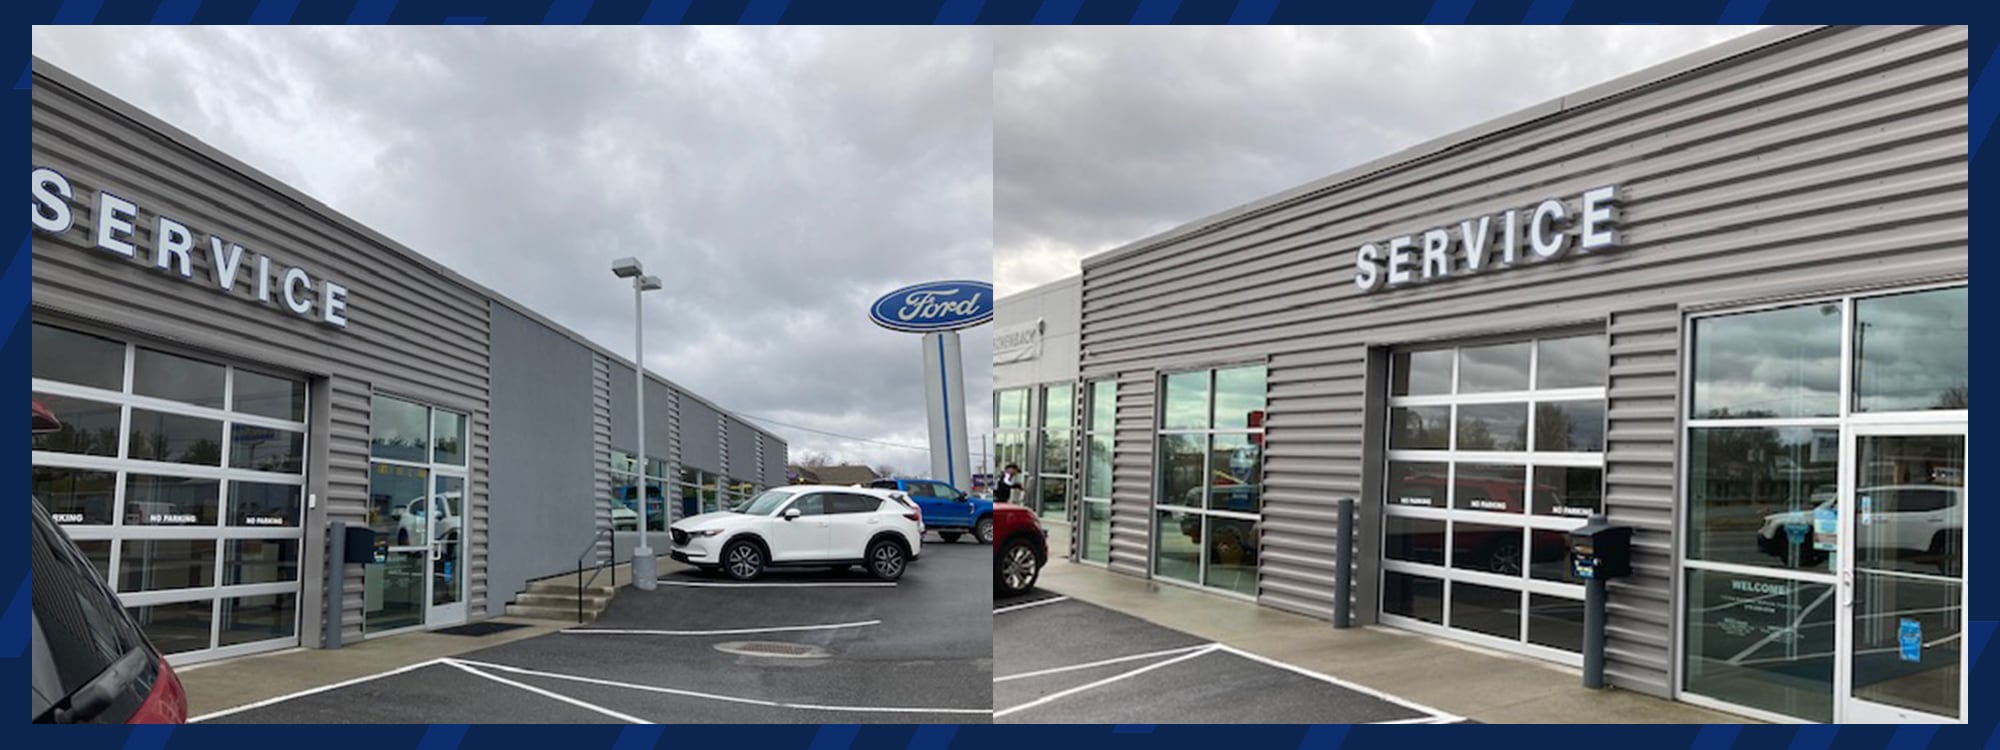 Service Department | Aschenbach Ford in Wytheville VA